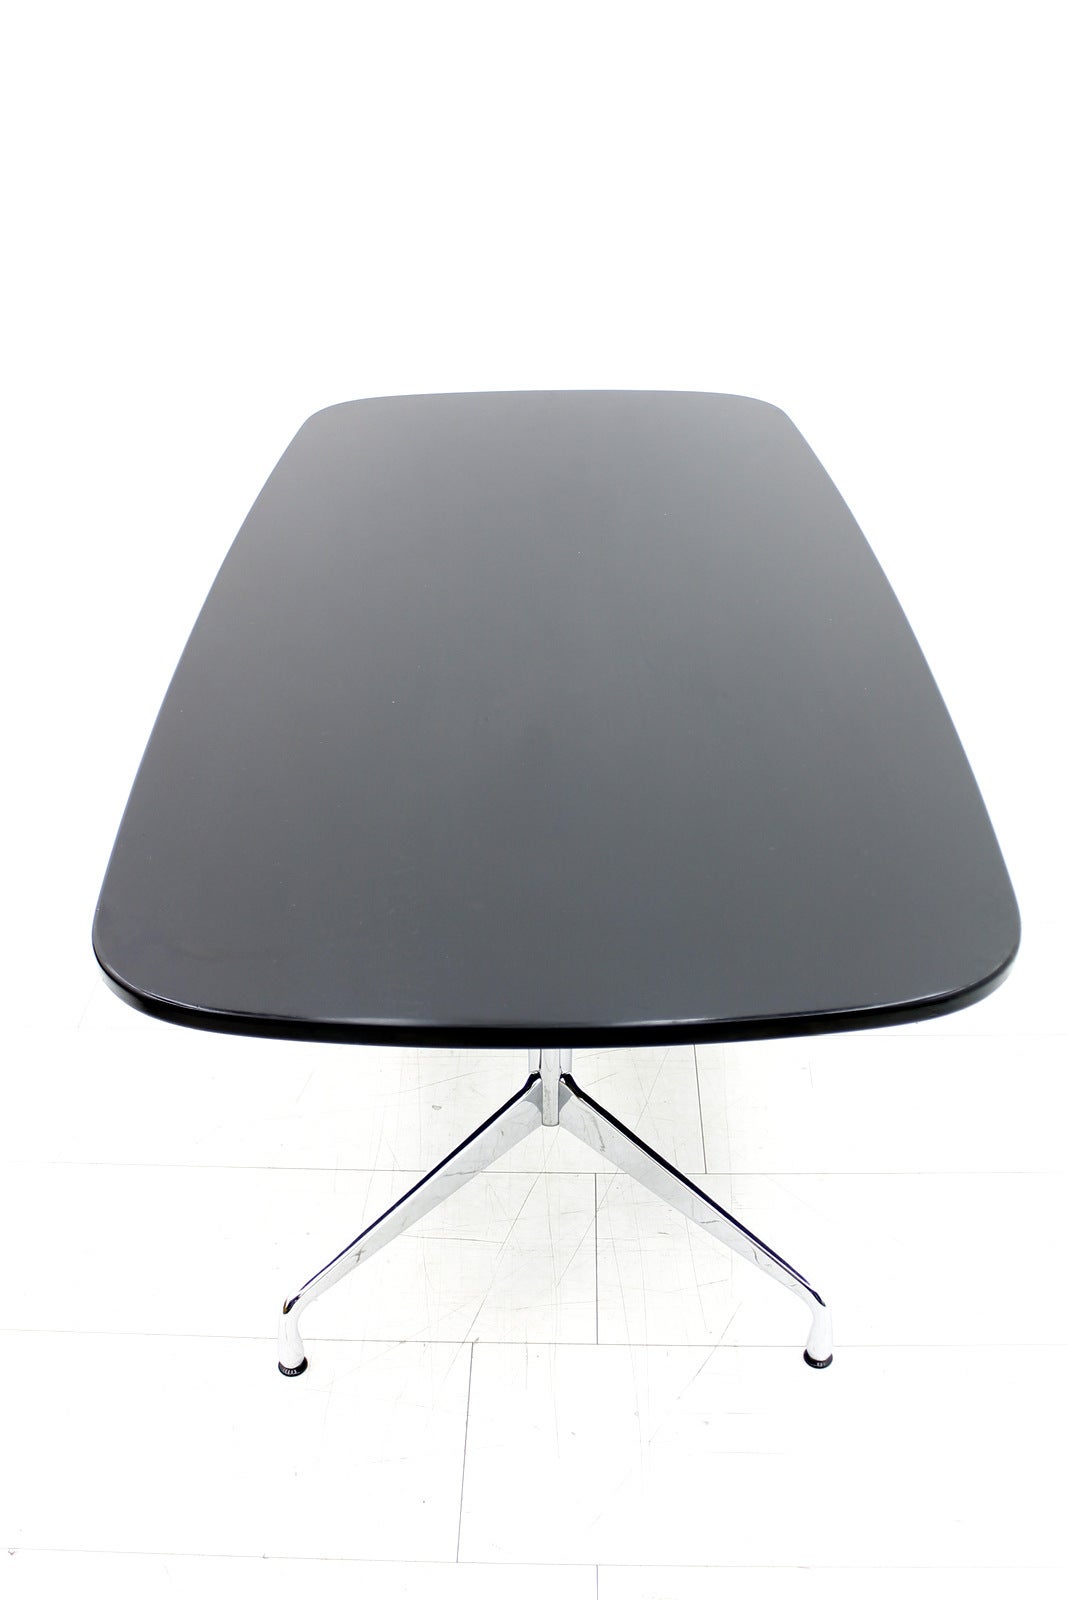 Eames Dining or Conference Table, Desk Vitra 2